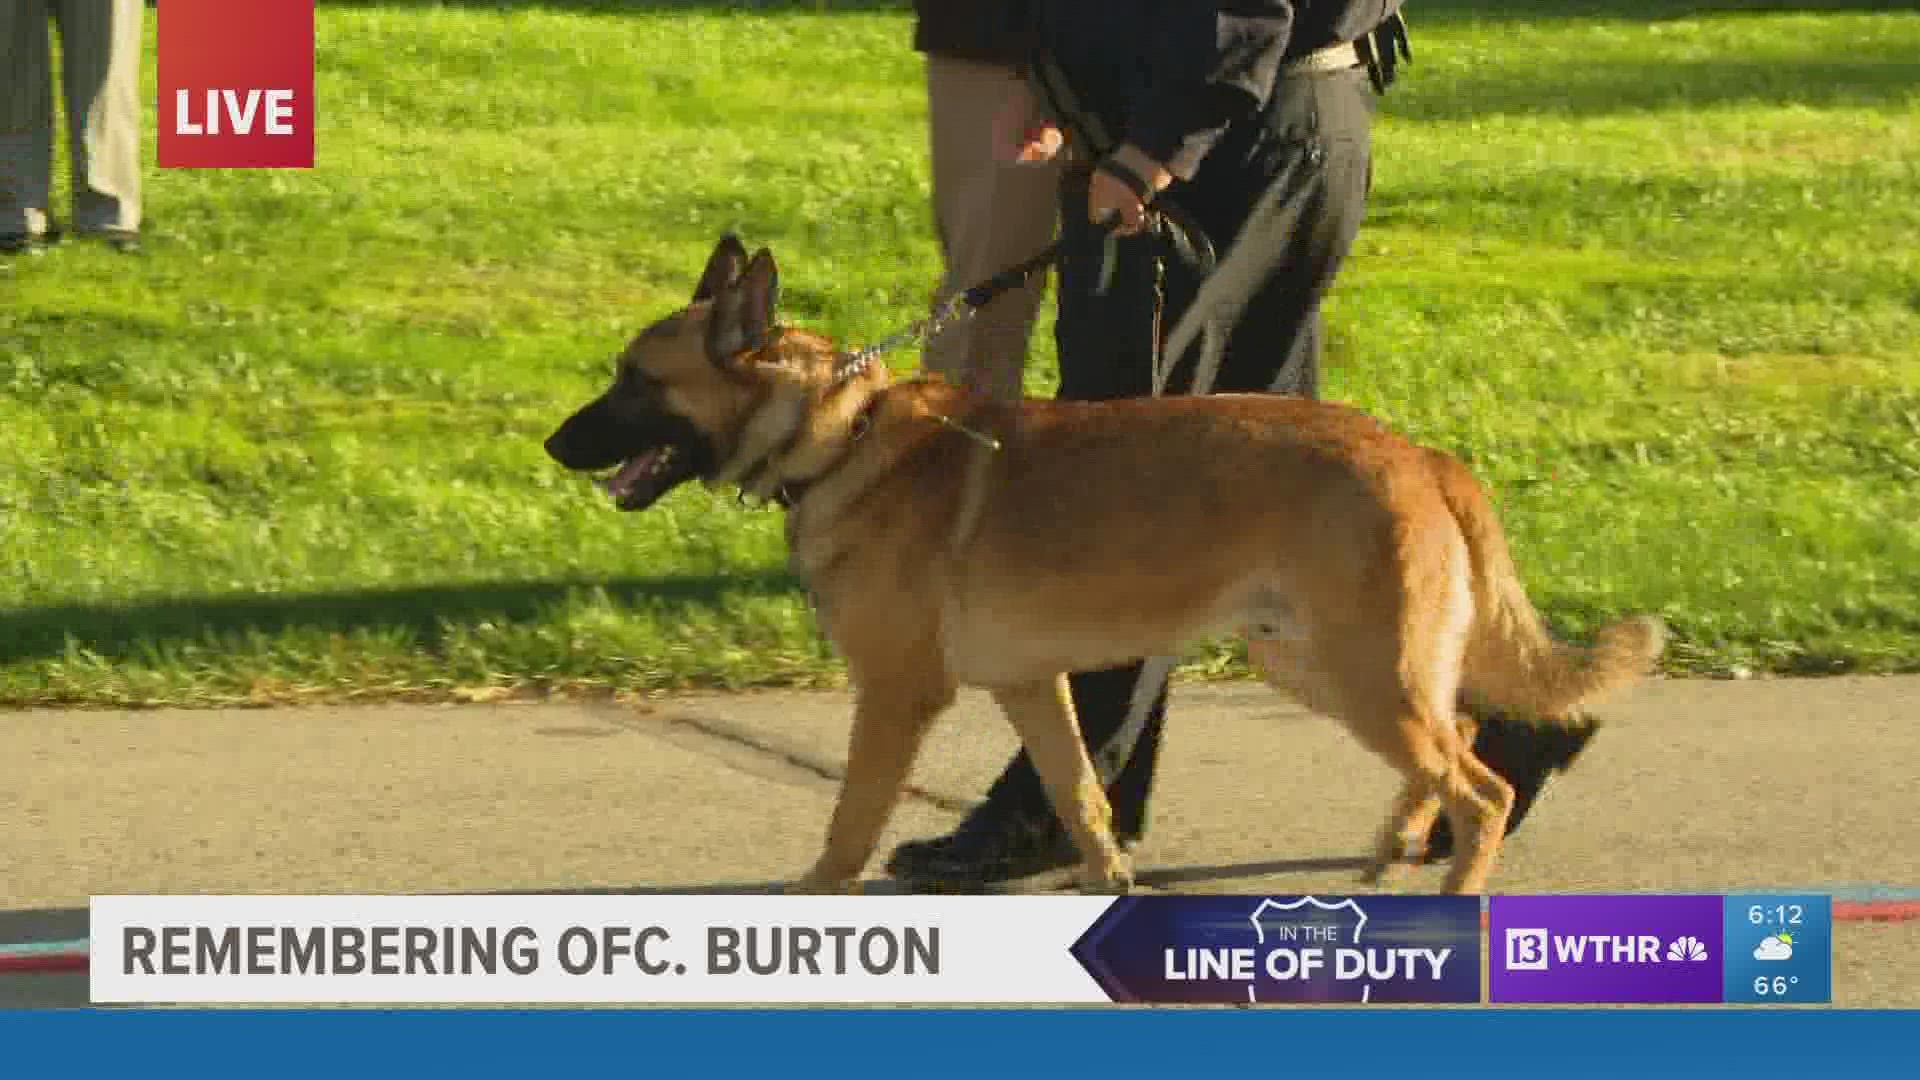 In a touching moment, K9 Brev was seen leading his partner Officer Seara Burton to her final resting place at Crown Hill Cemetery.